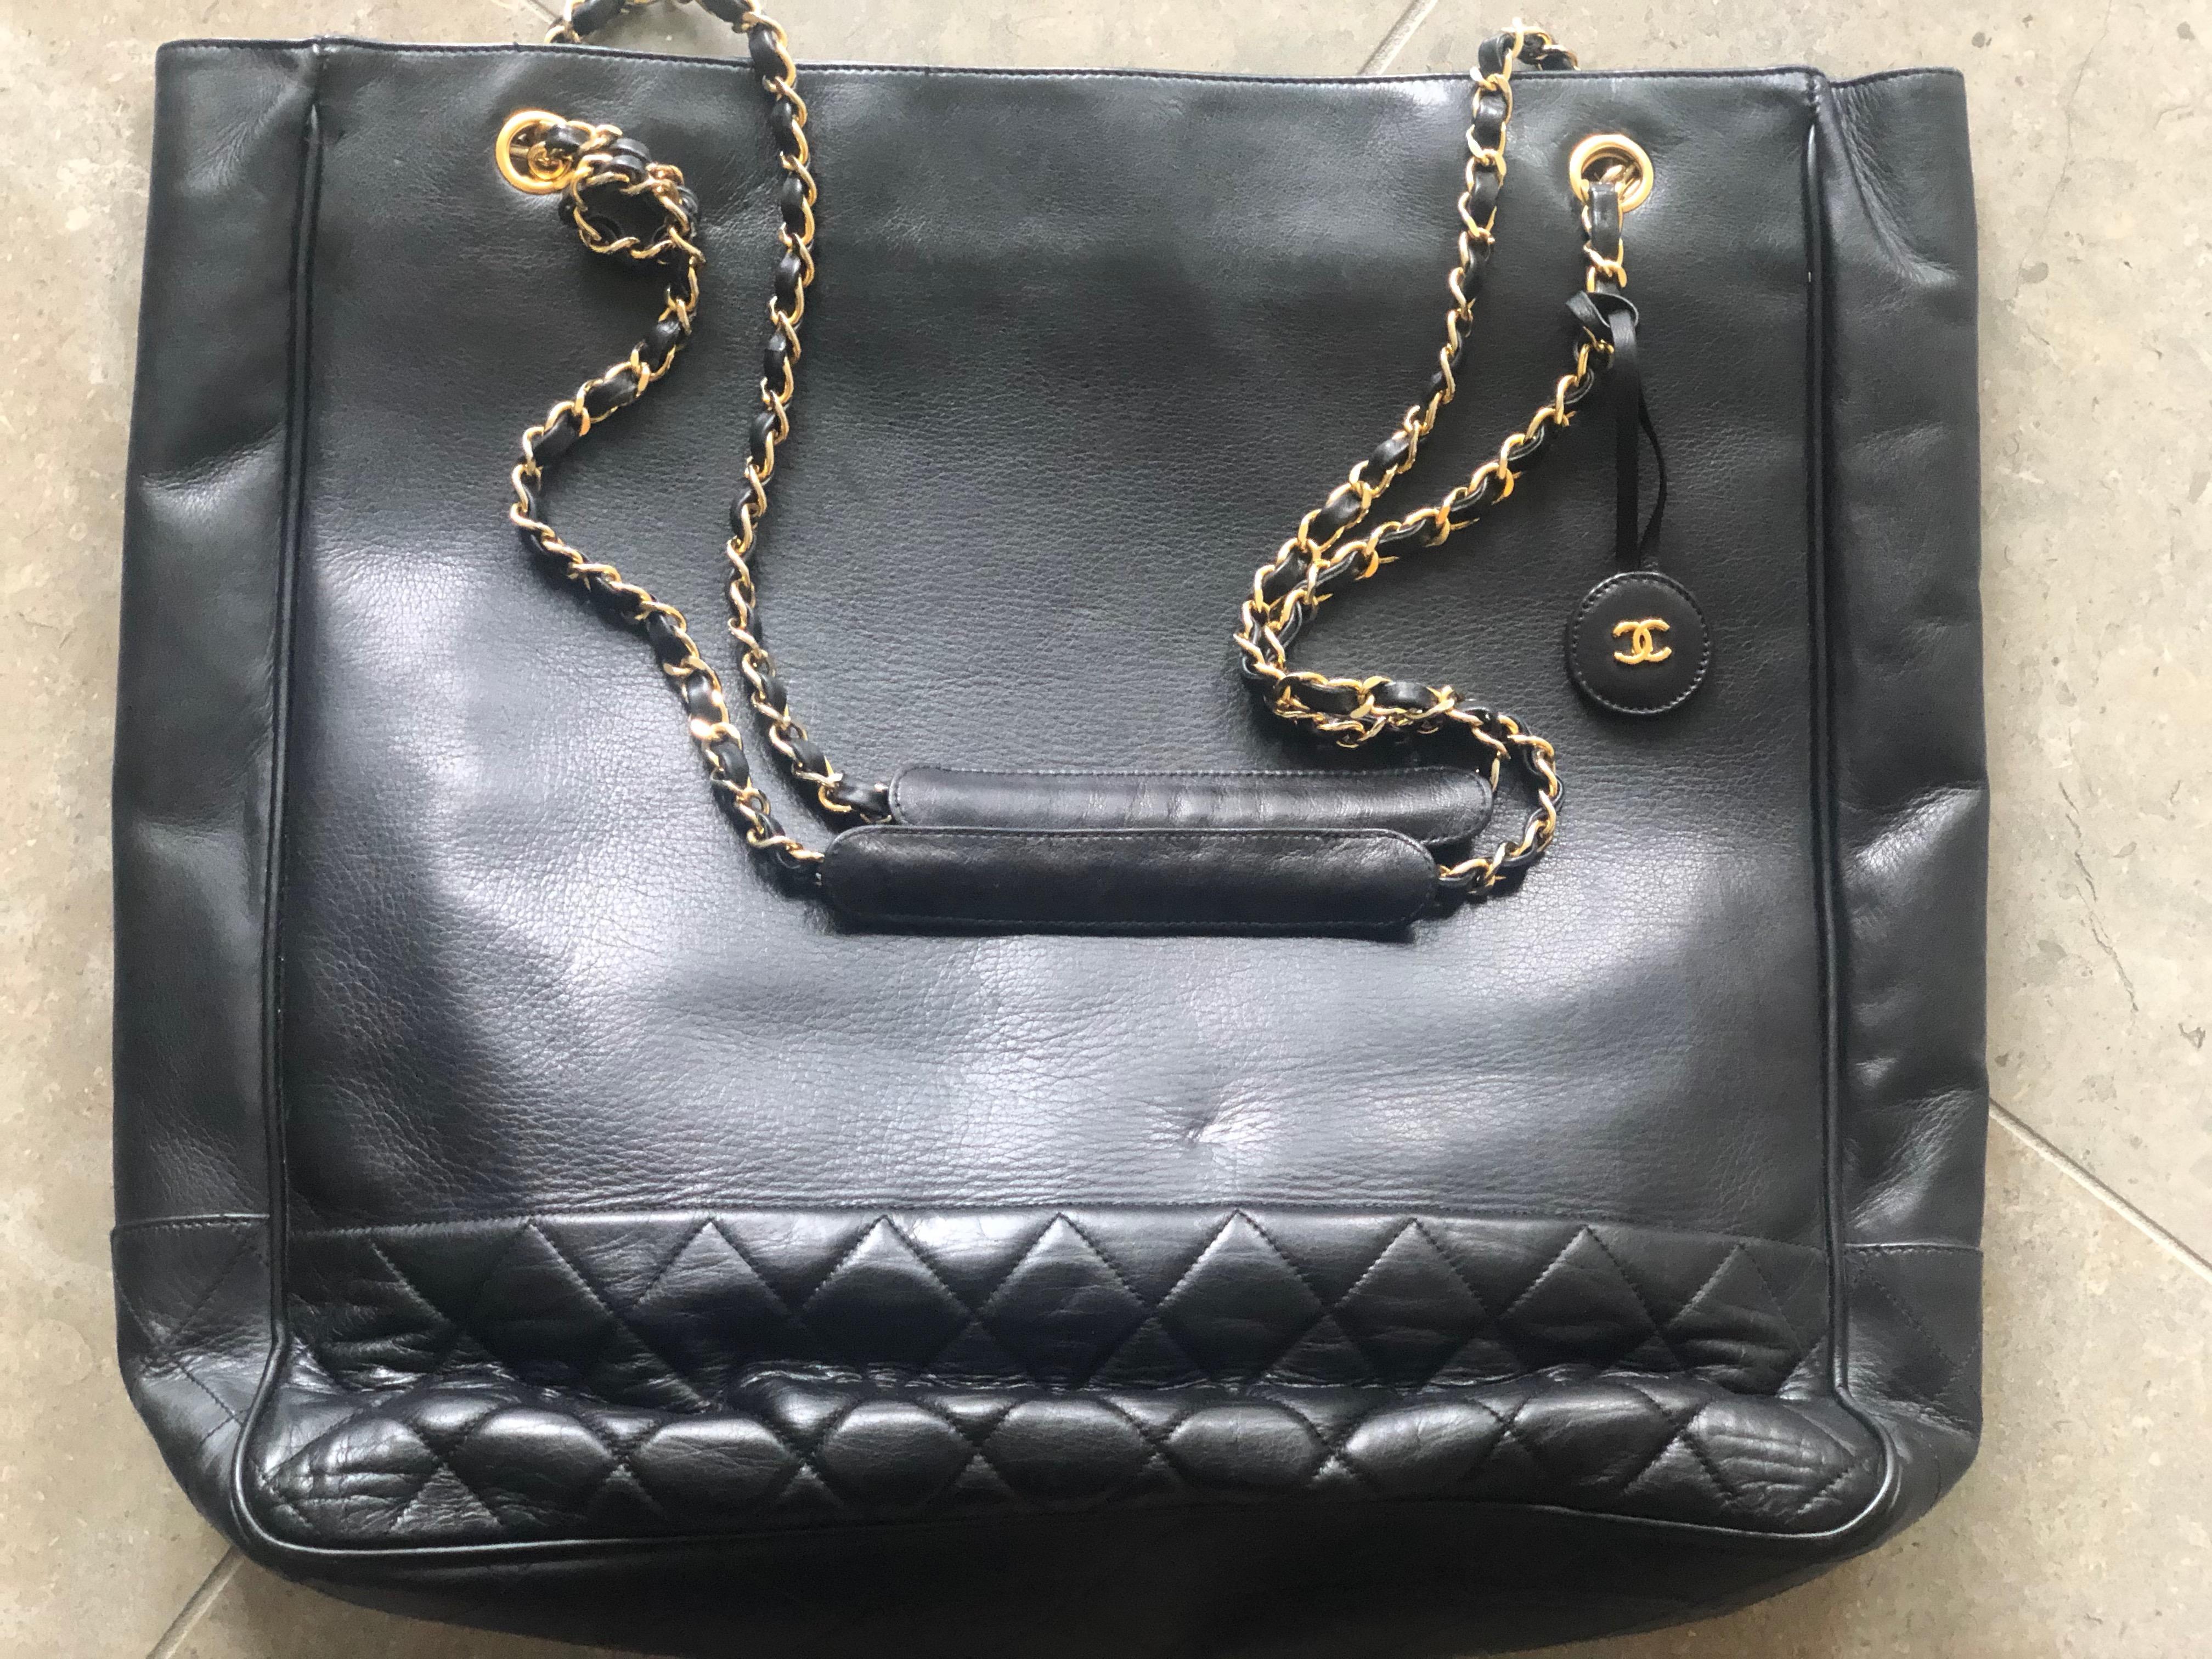 Gray Chanel Large Black Leather Shoulder Bag with Gold Hardware and Quilted Details  For Sale